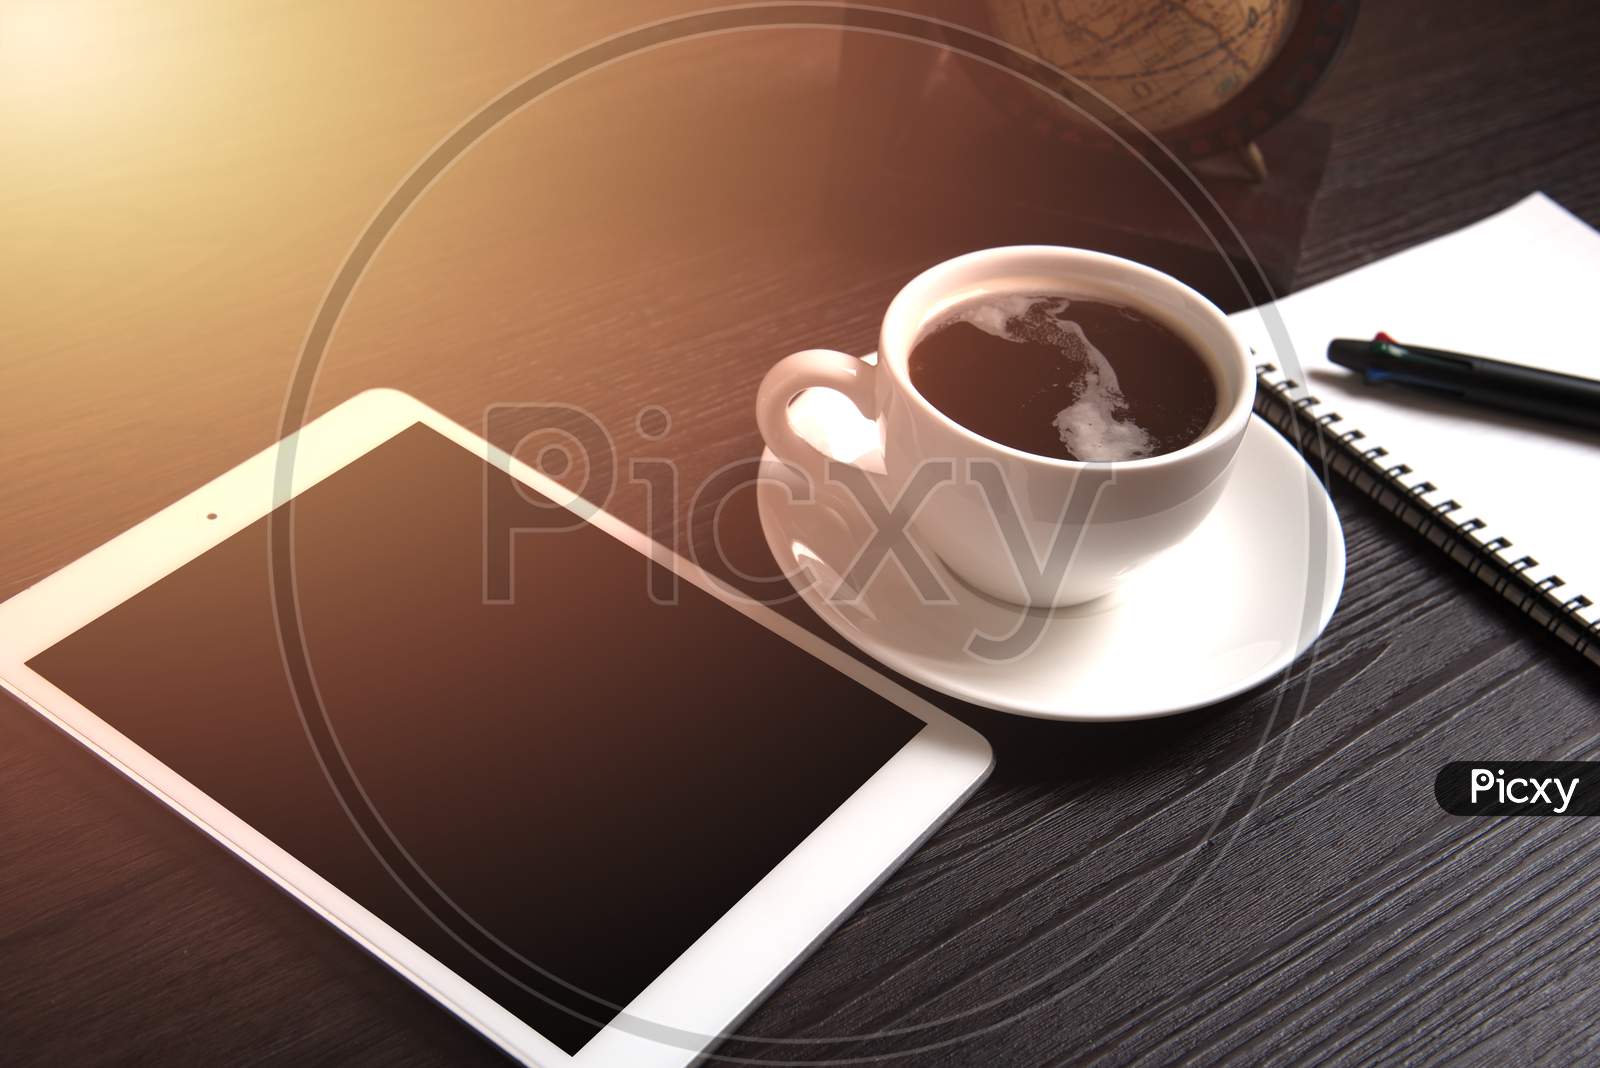 Tablet And Black Coffee On Wooden Table With Digital Earth World Map And Orange Light And Line Dot, Notebook And Pen, Technology Concept, Drinking And Relax Concept, Coffee Break Time Concept